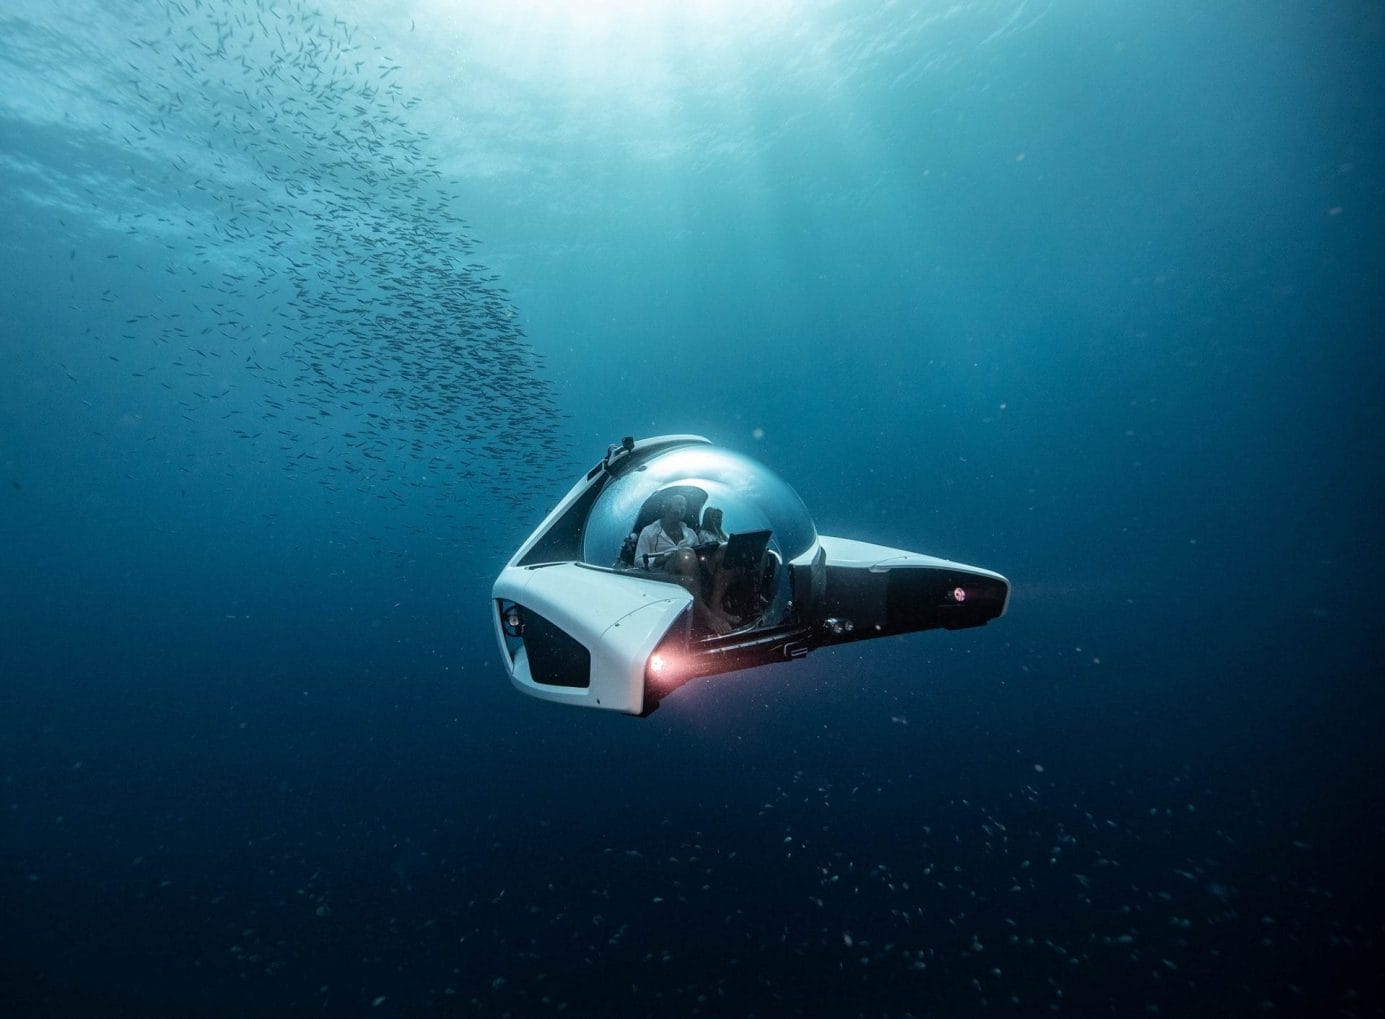 A U-Boat Worx submersible vehicle floating in the ocean.